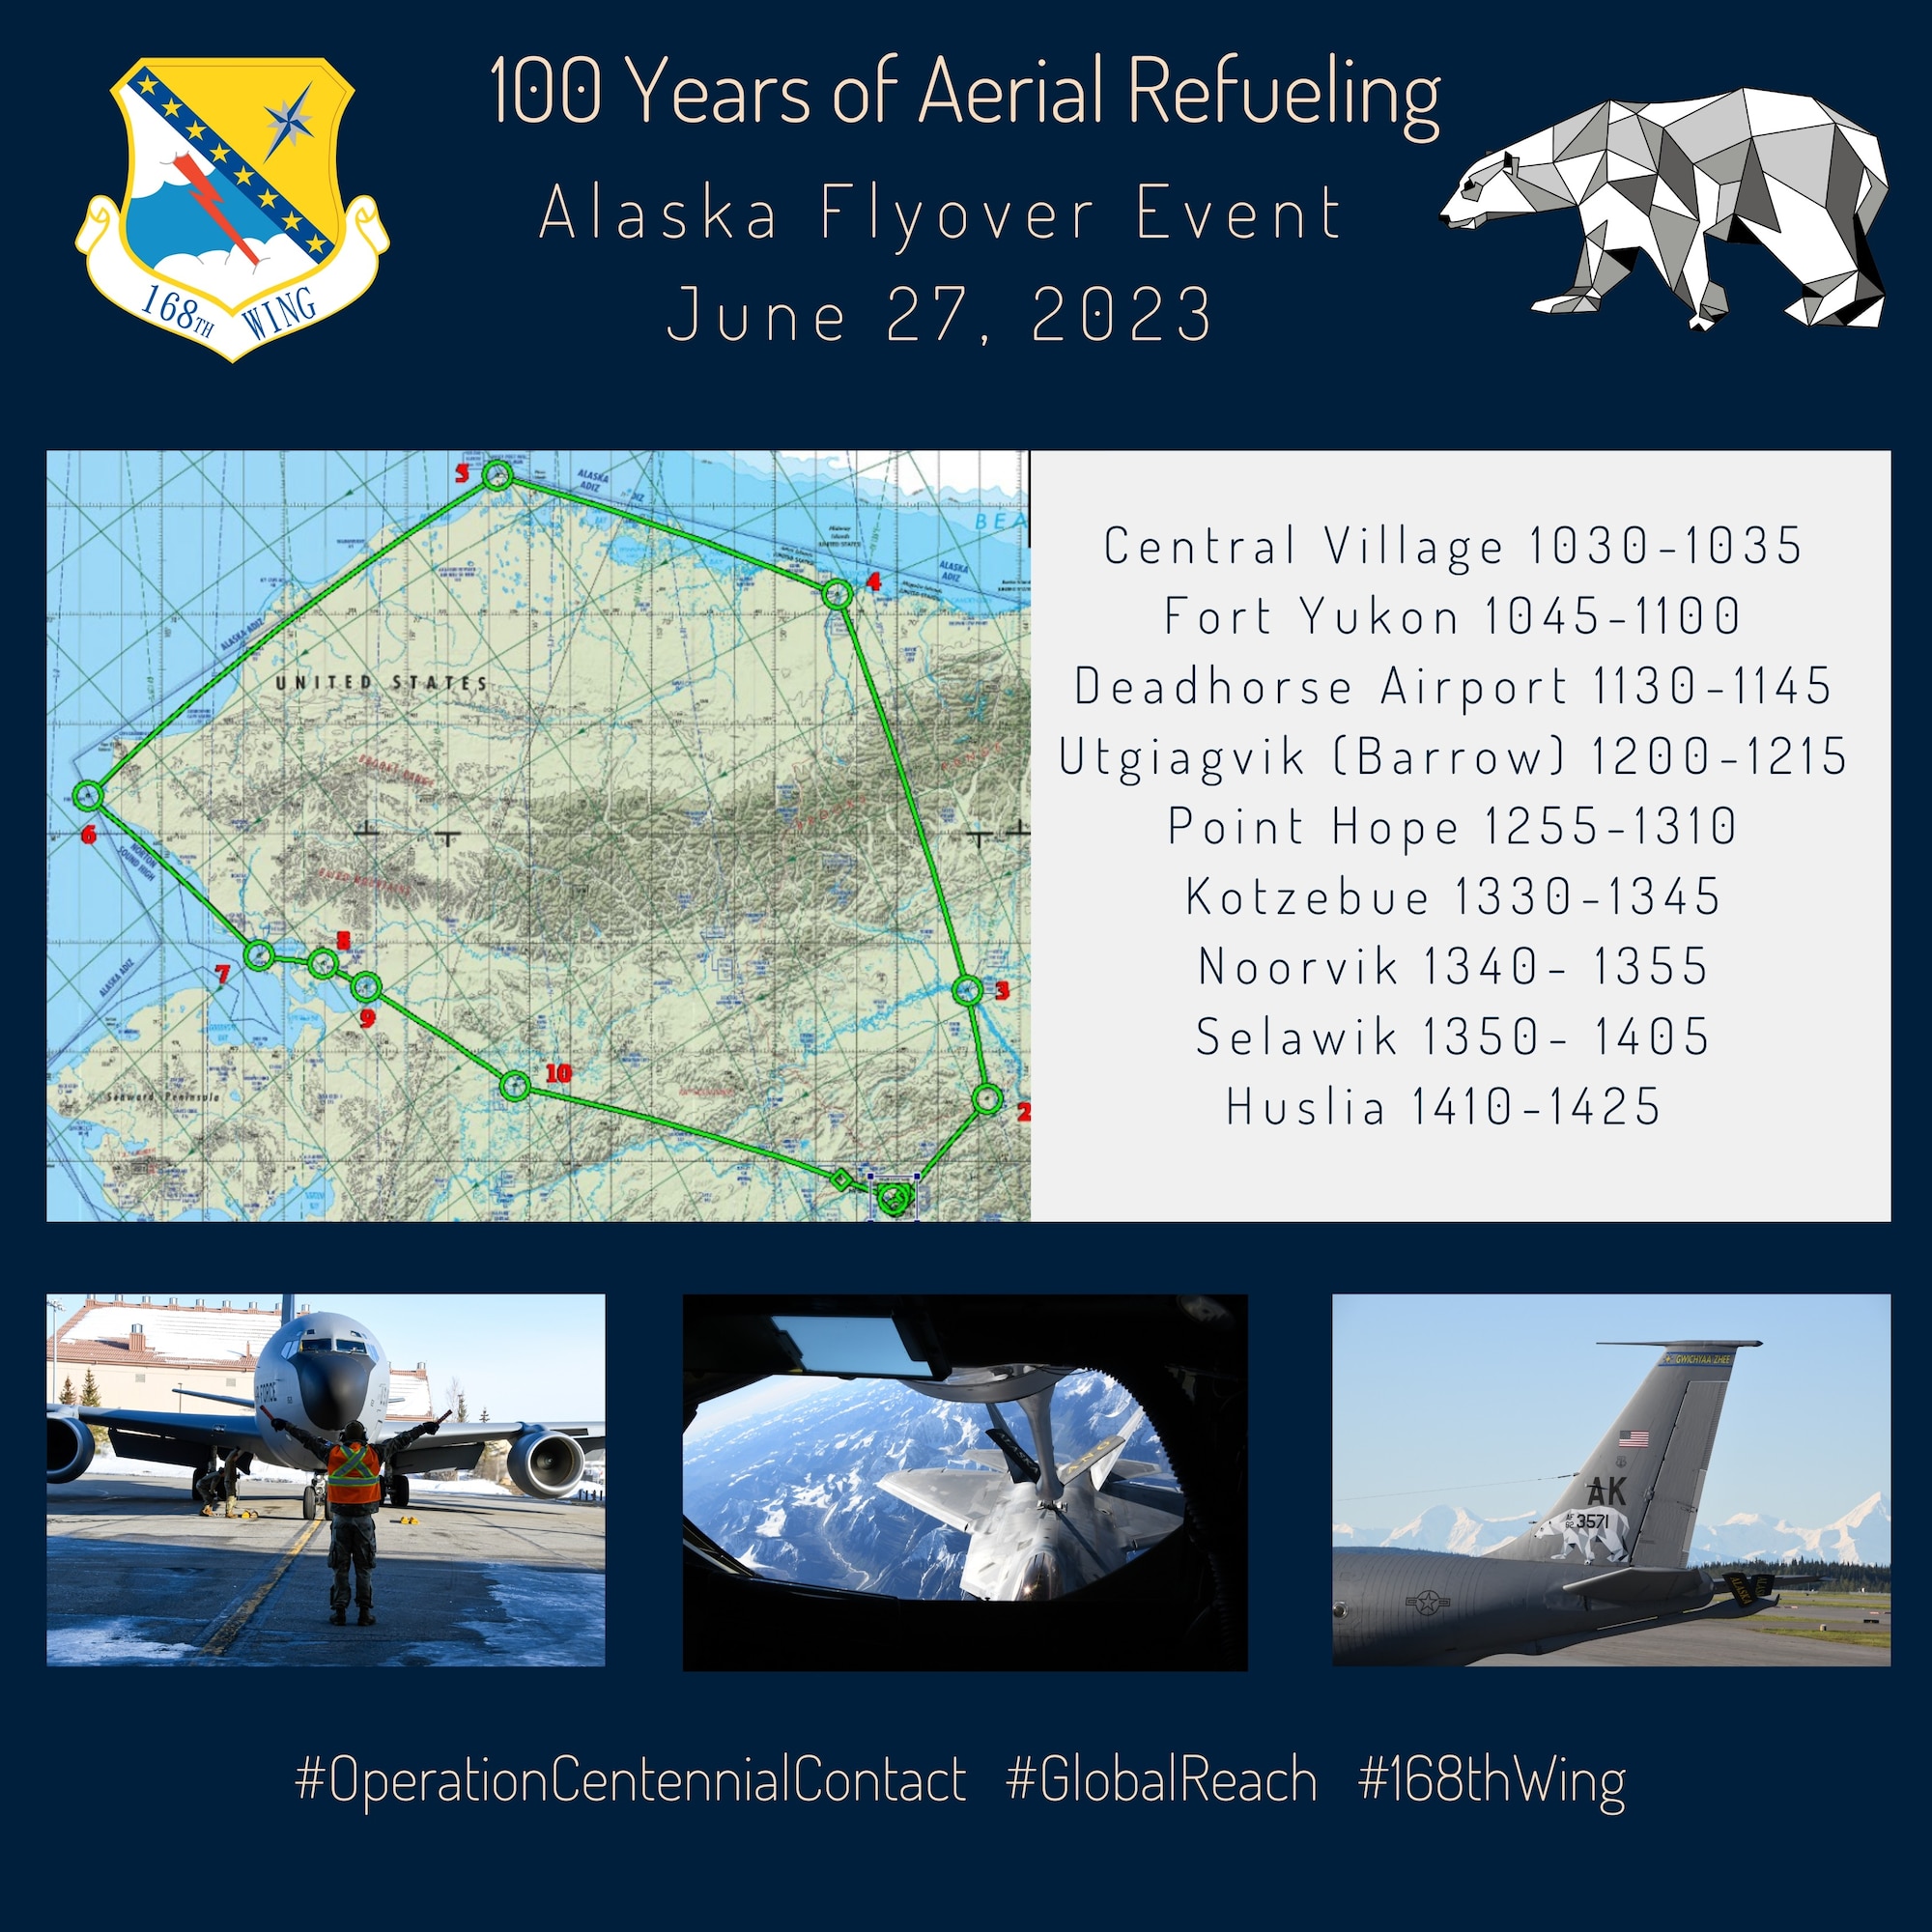 The 168th Wing, Alaska Air National Guard, is scheduled to conduct KC-135 Stratotanker flyovers across Alaska starting at approximately 10:30 a.m., June 27 as a part of the United States Air Force’s commemoration of 100 years of aerial refueling excellence.